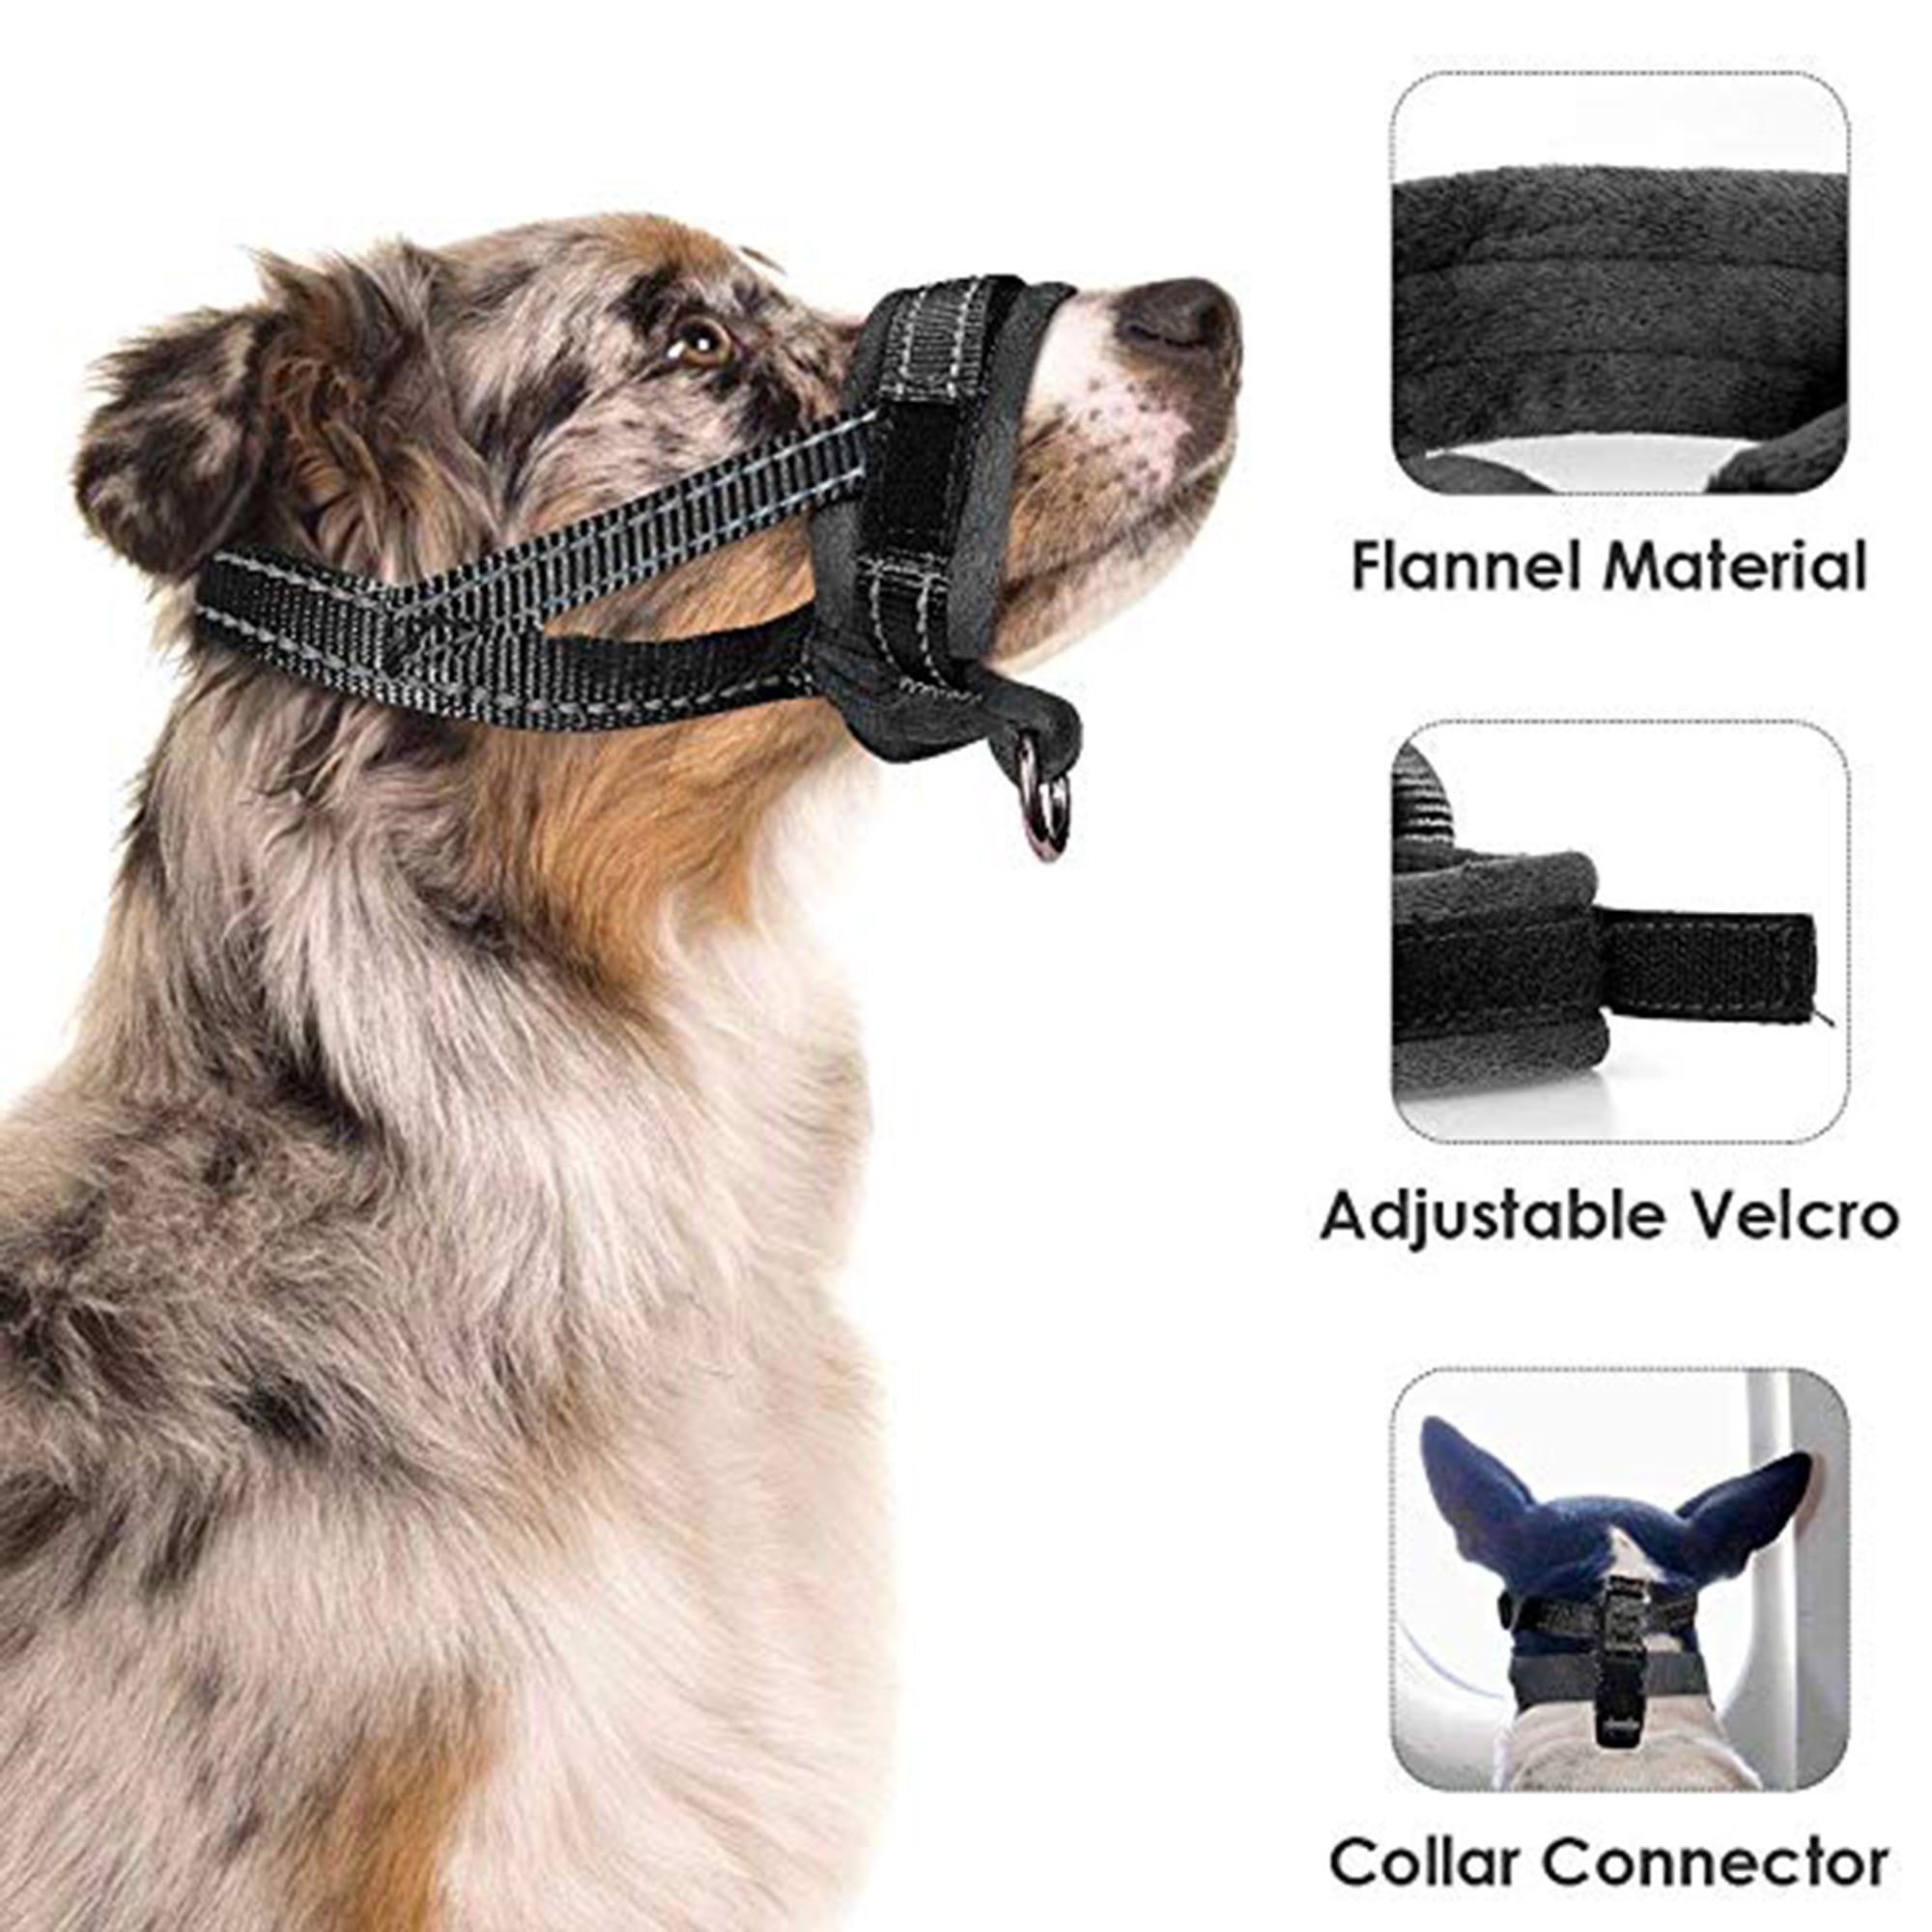 Update Nylon Dog Mouth Cover Prevent from Biting Barking Chewing Behavior Training More Comfortable Adjustable Soft Reflective Quick Fit for Medium Large Dogs AutoWT Dog Muzzle Medium 